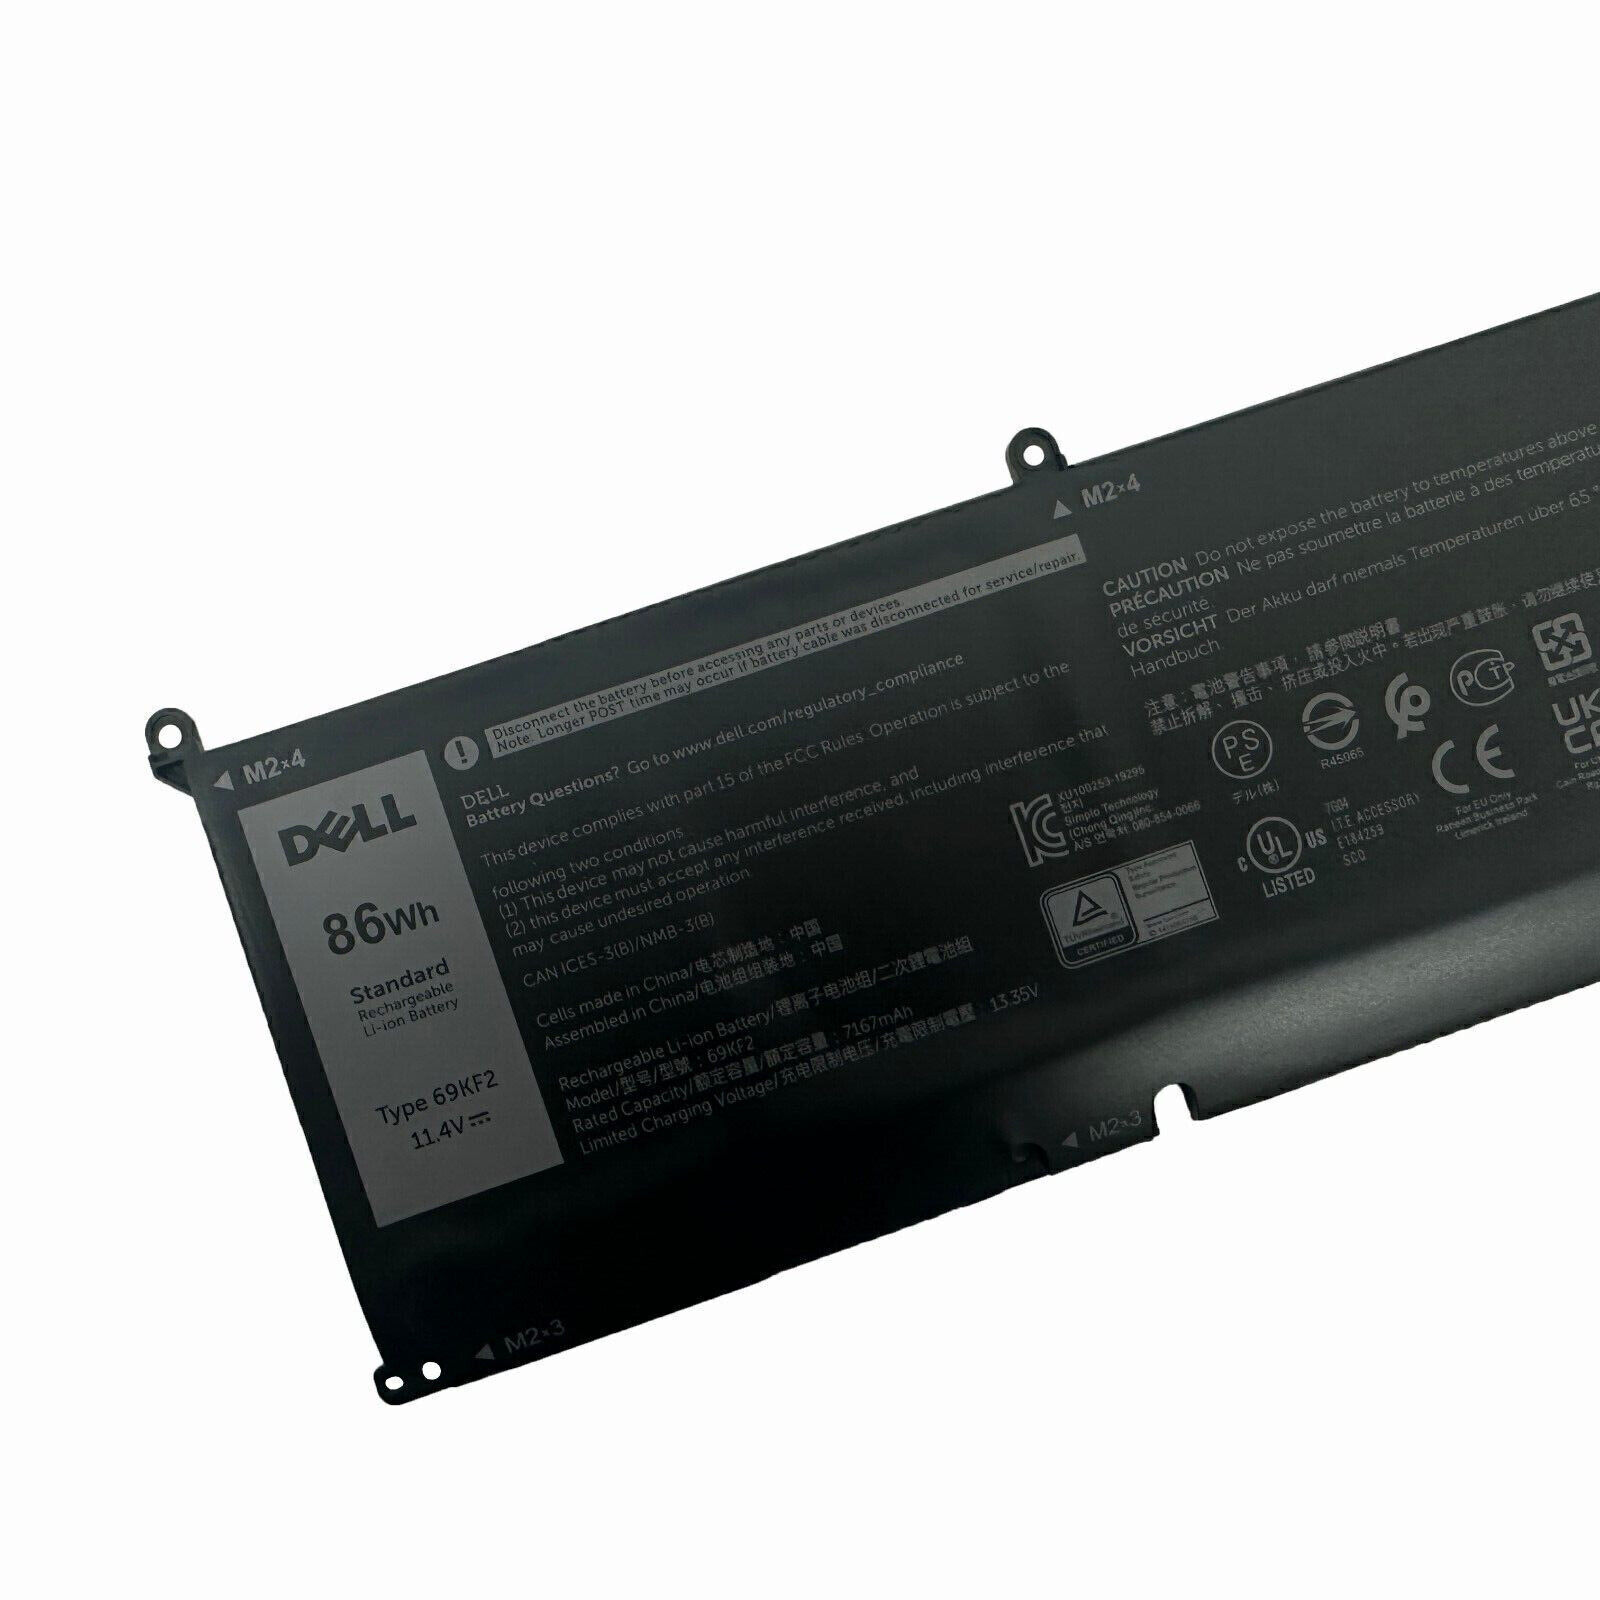 Genuine 86Wh 69KF2 Battery For Dell XPS 15 9500 9510 9520 Alienware M15 R3 R4 R5